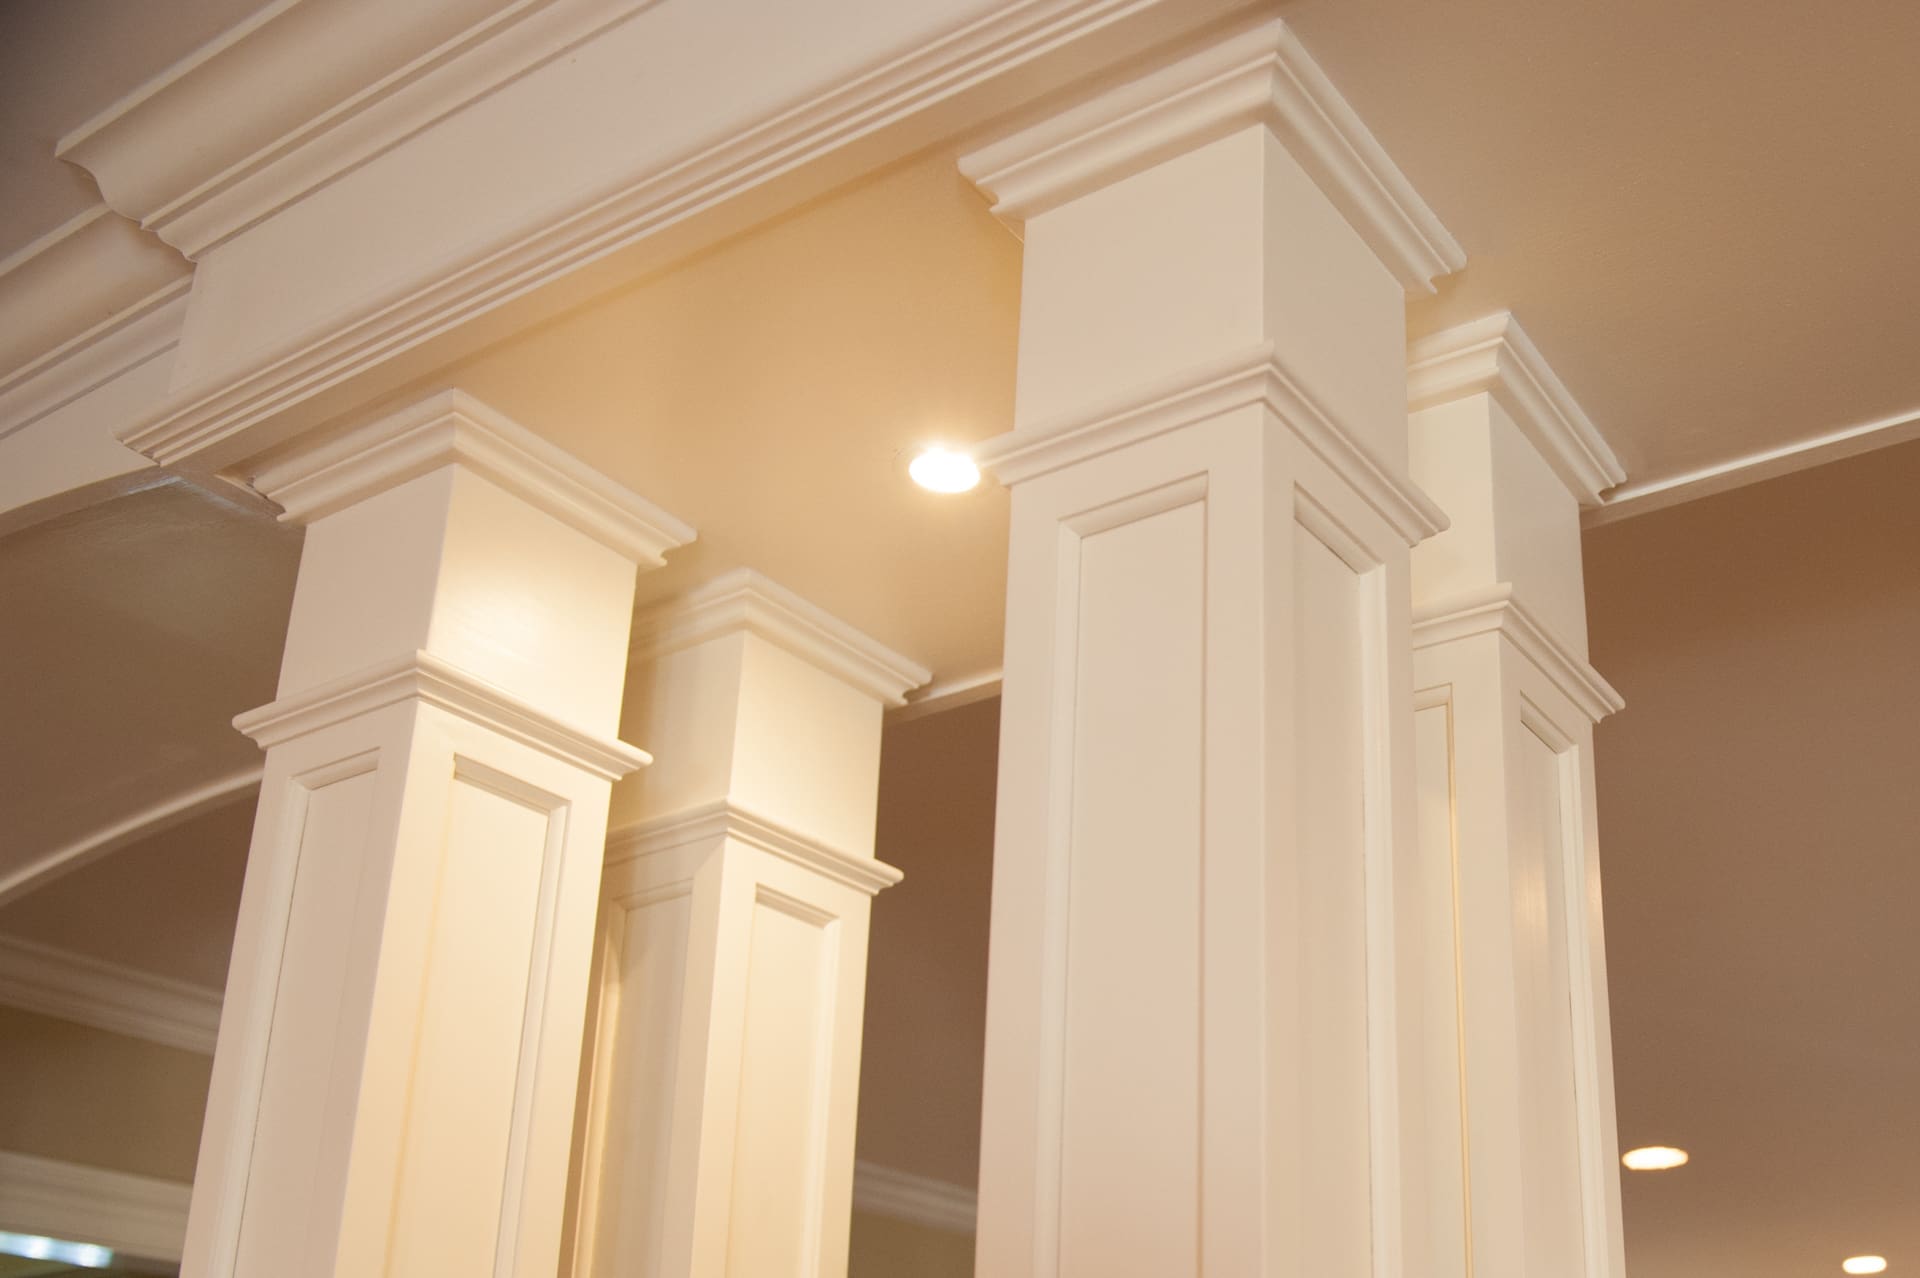 A photo of four white, shaker-style square columns.